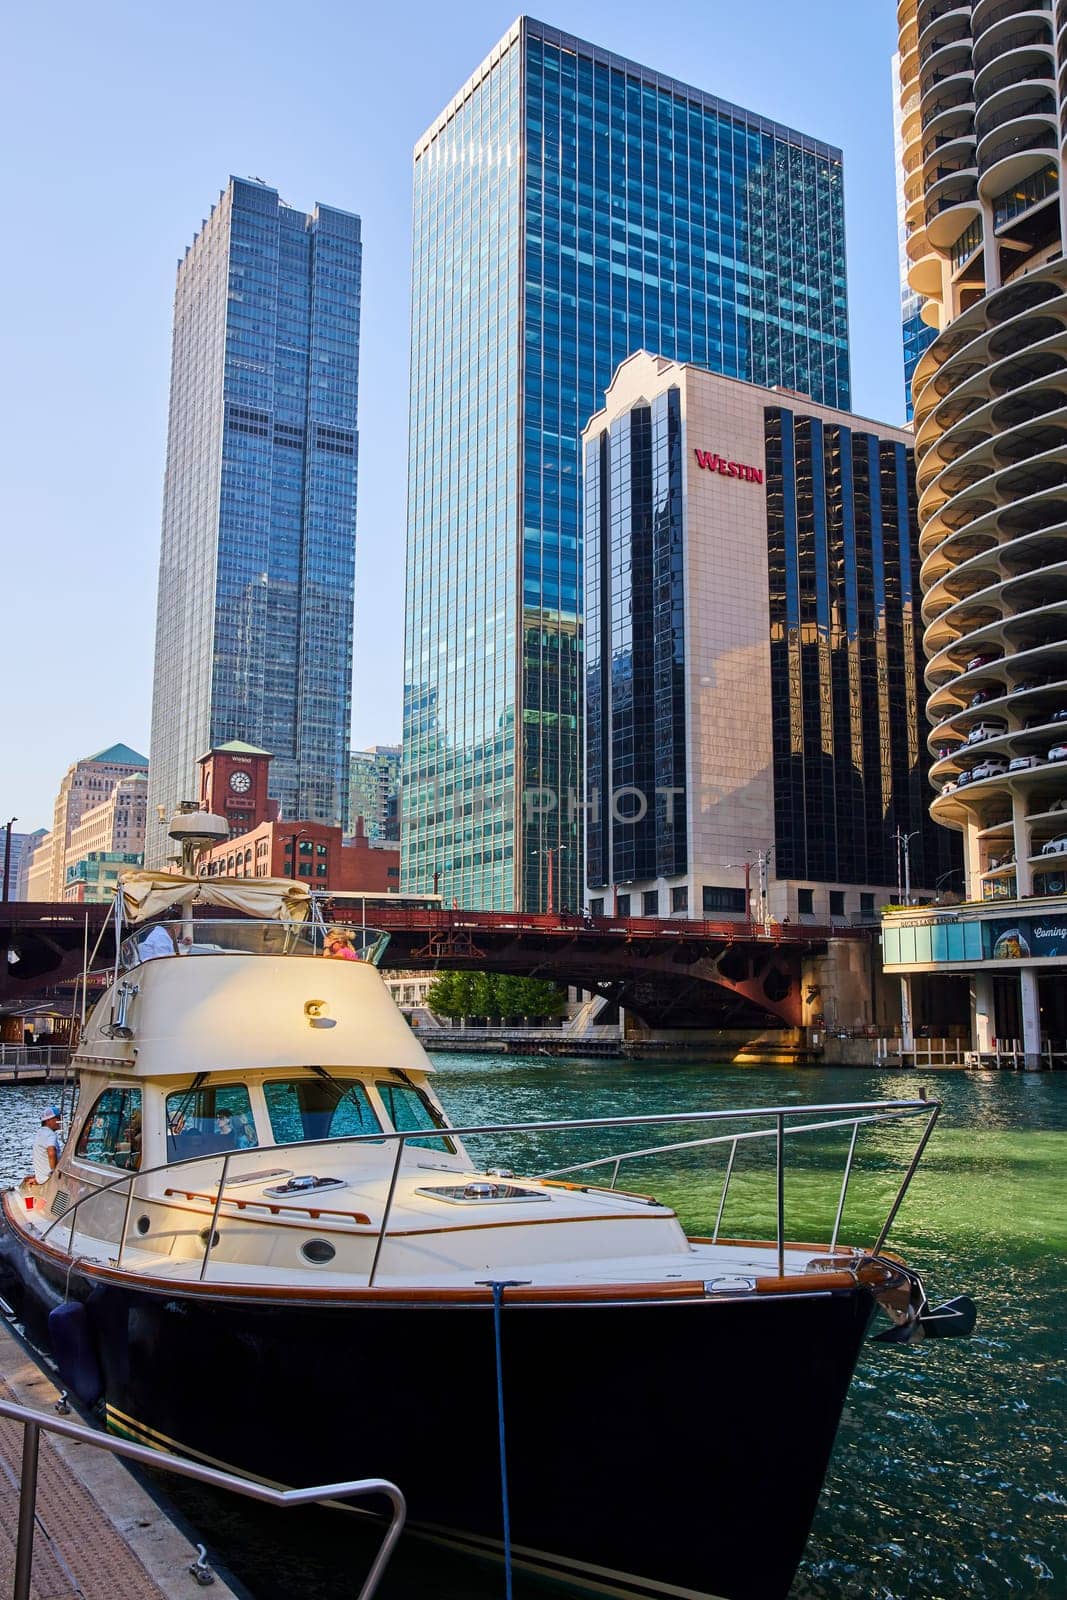 Boat close up with Chicago canal and bridge with skyscraper hotel and offices background, Illinois by njproductions